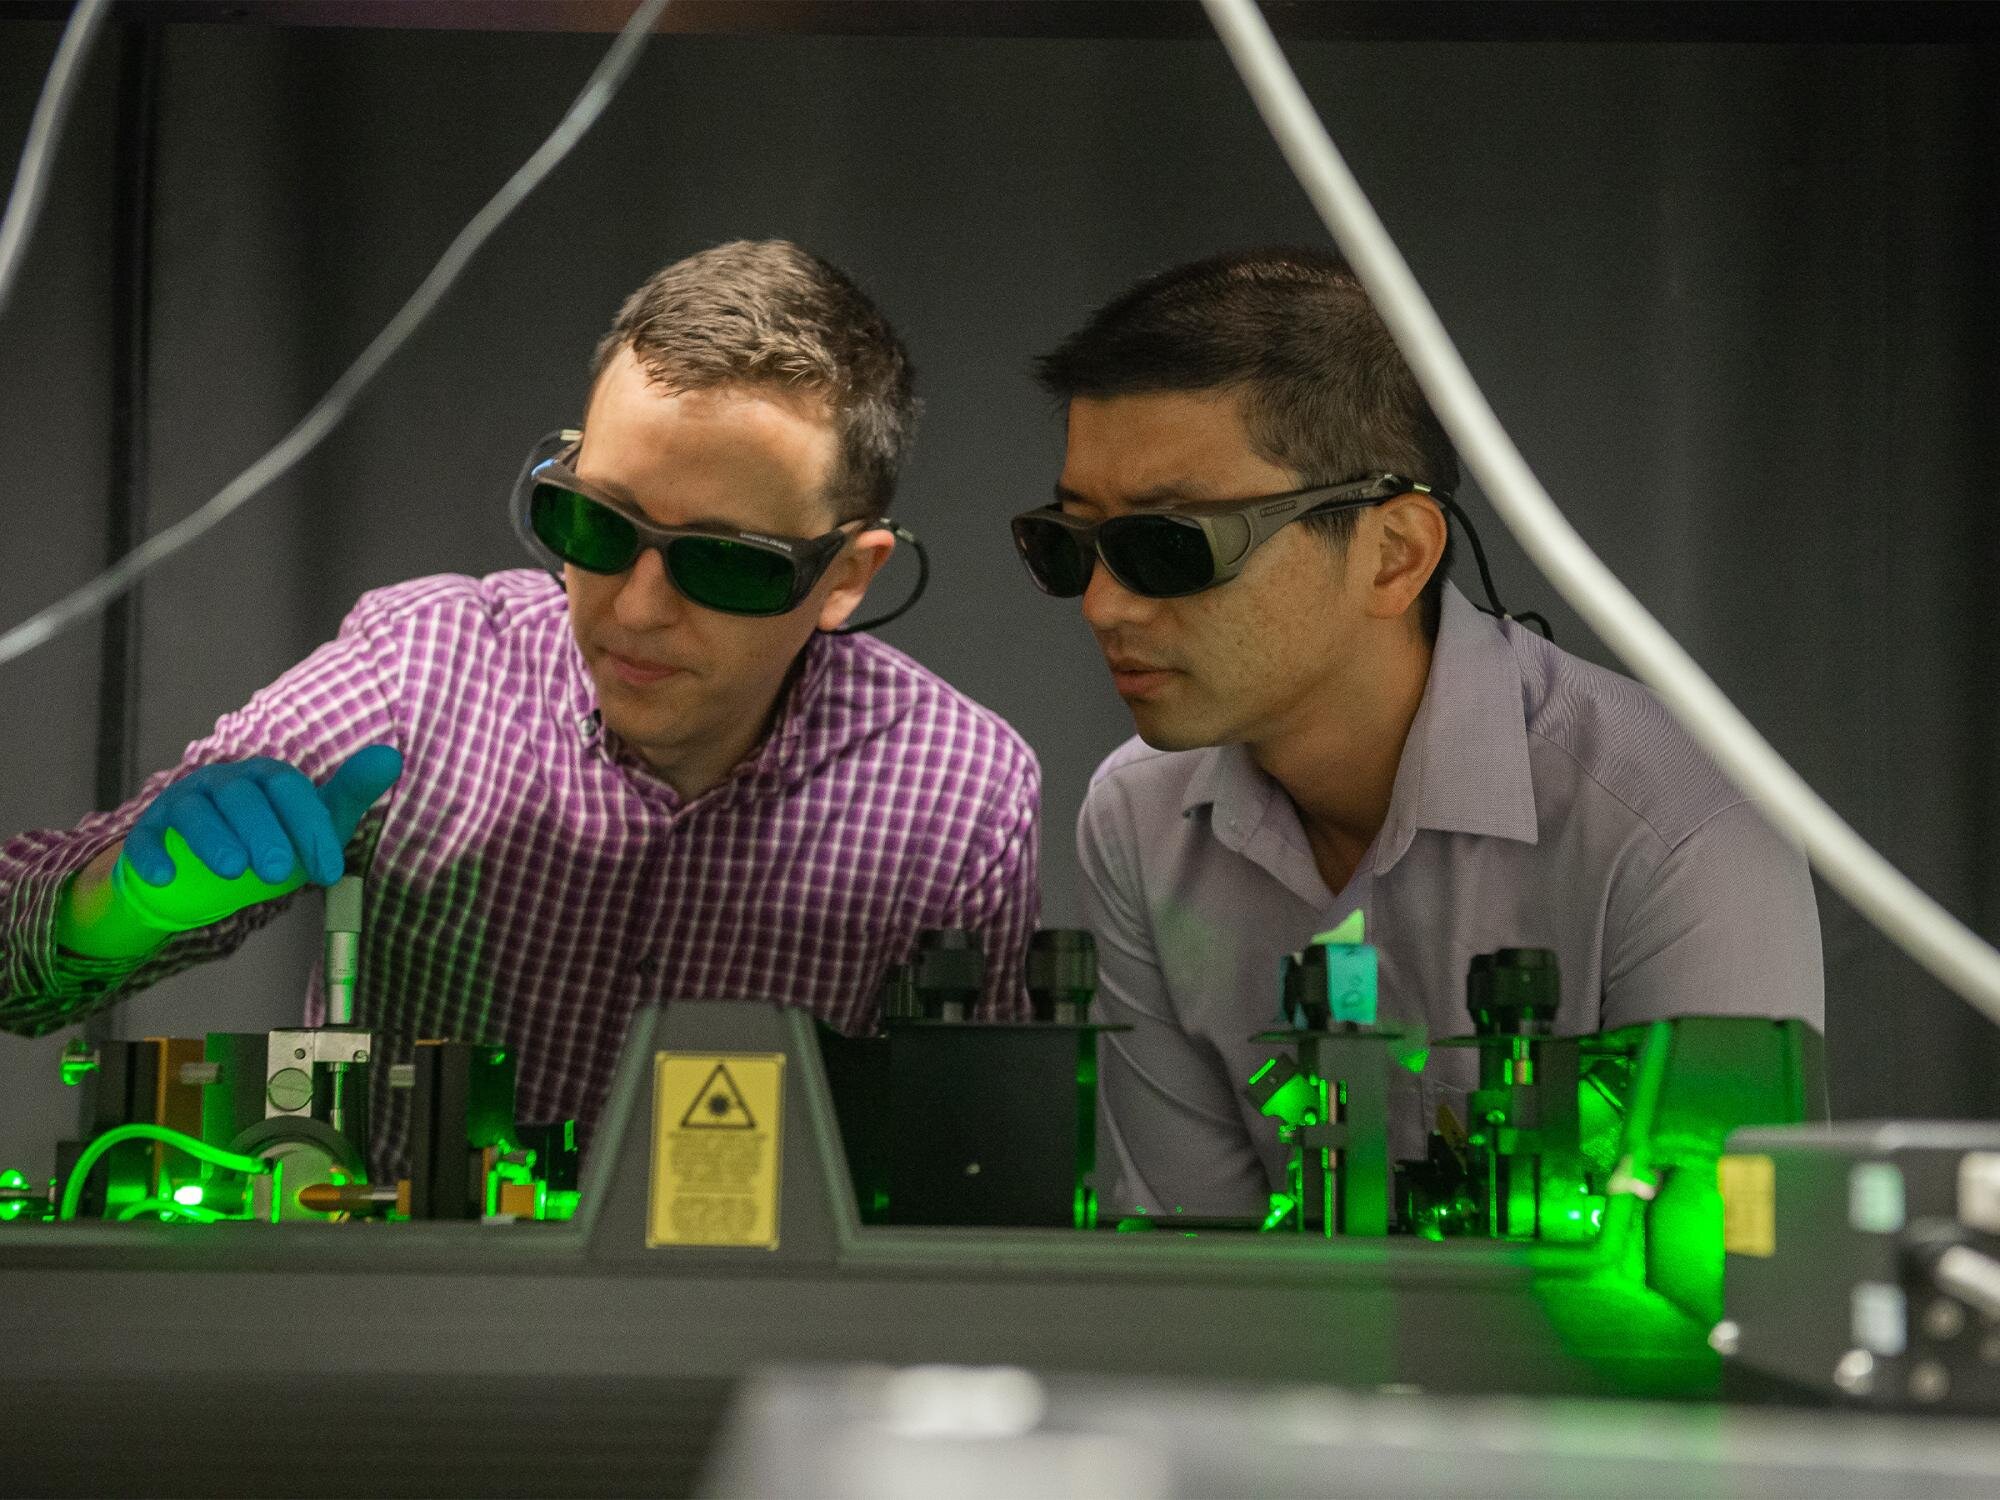 Laser writing may enable 'electronic nose' for multi-gas sensor